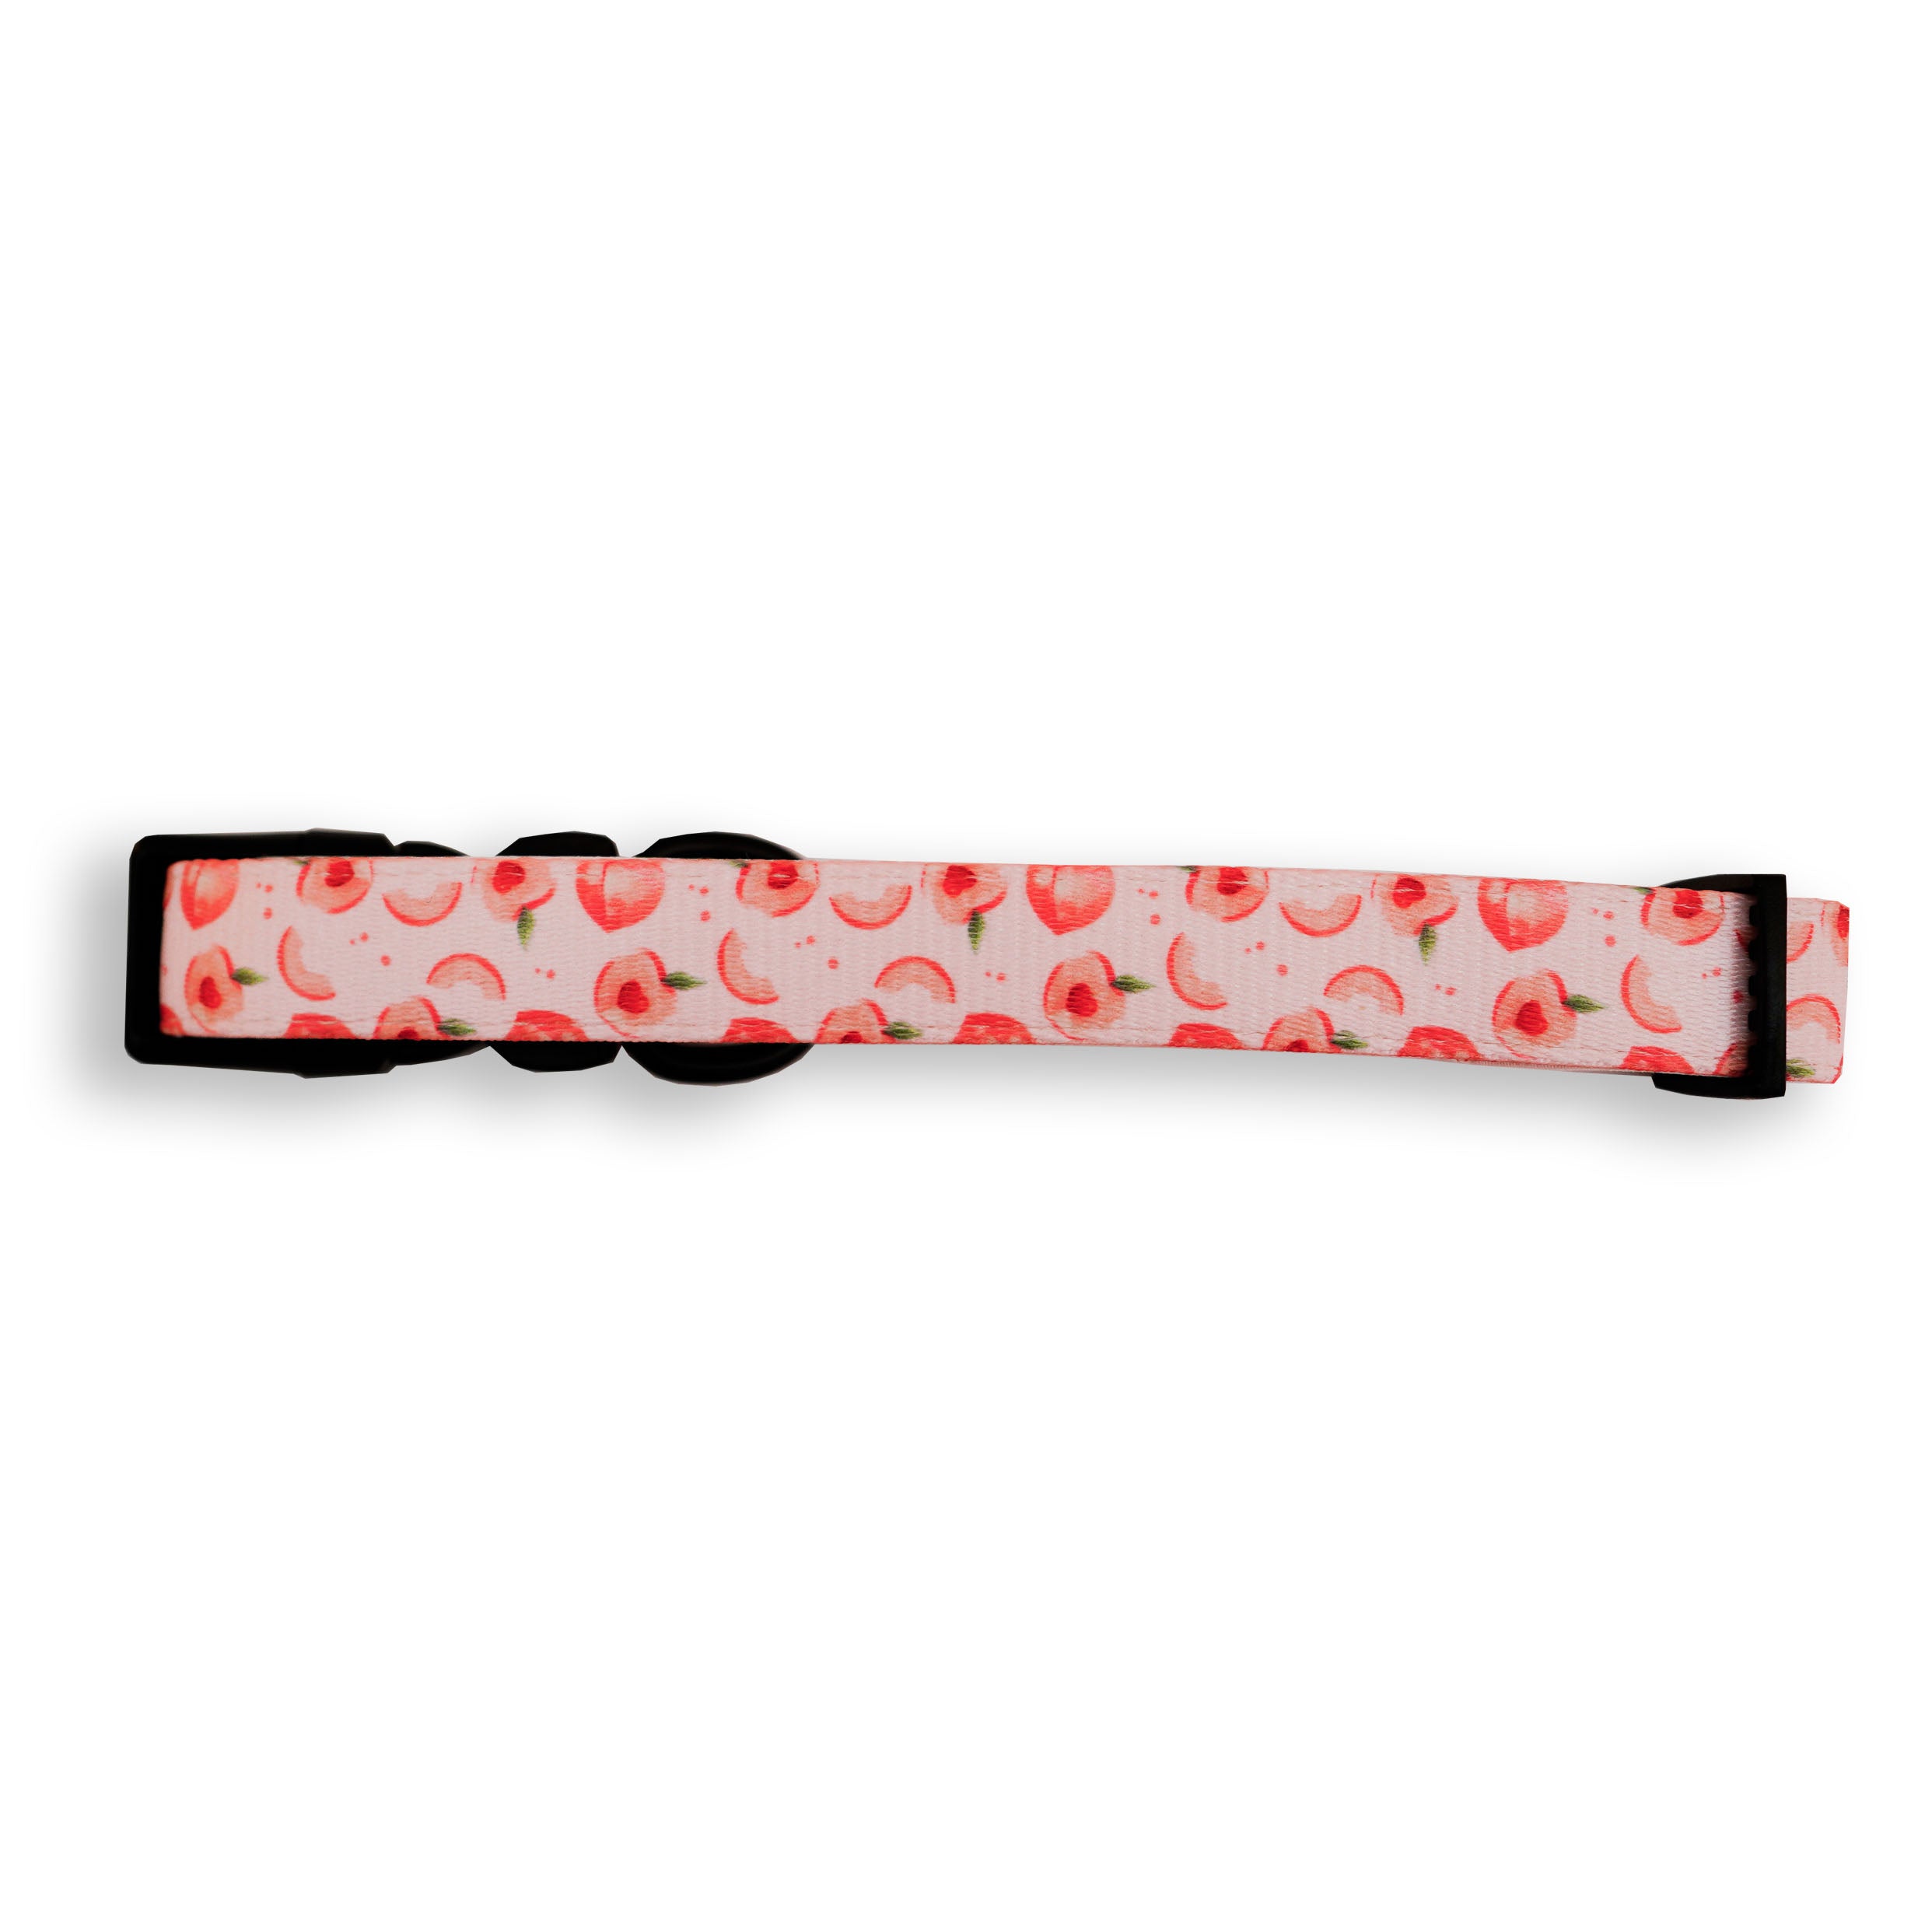 Aylabella Co. - Peach Collar for Dogs (4 Sizes)